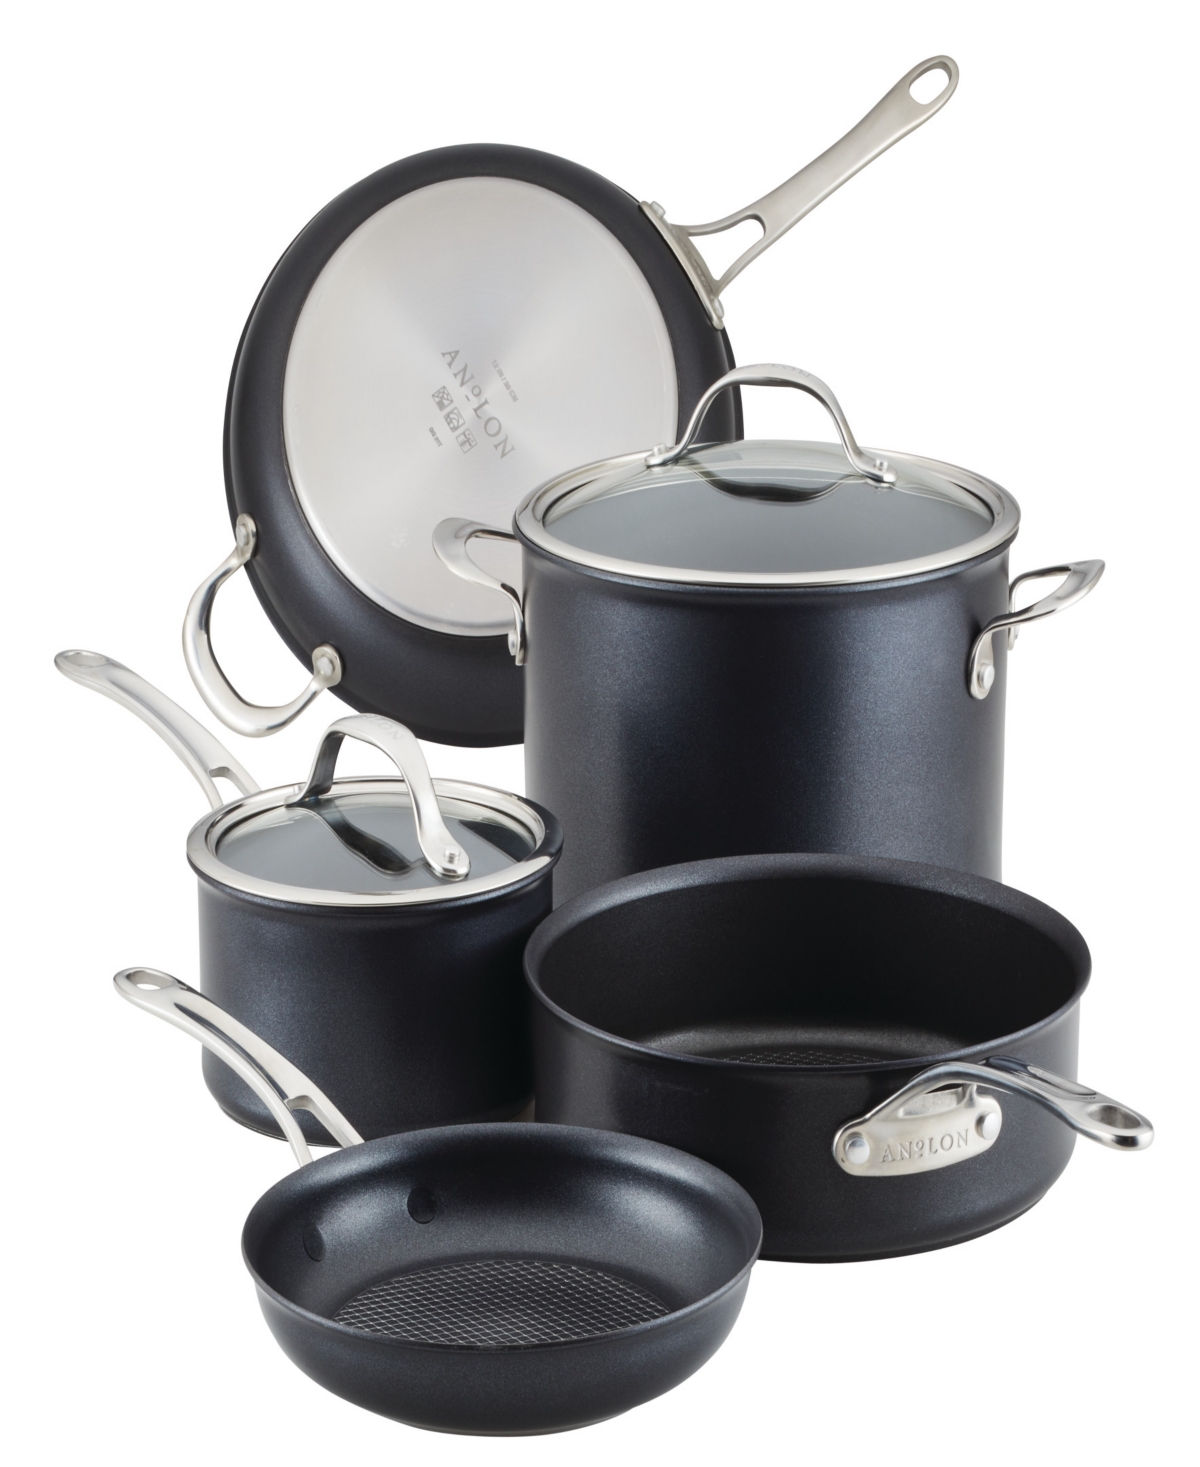 Anolon X Hybrid 7-piece Nonstick Cookware Induction Pots And Pans Set In Super Dark Gray